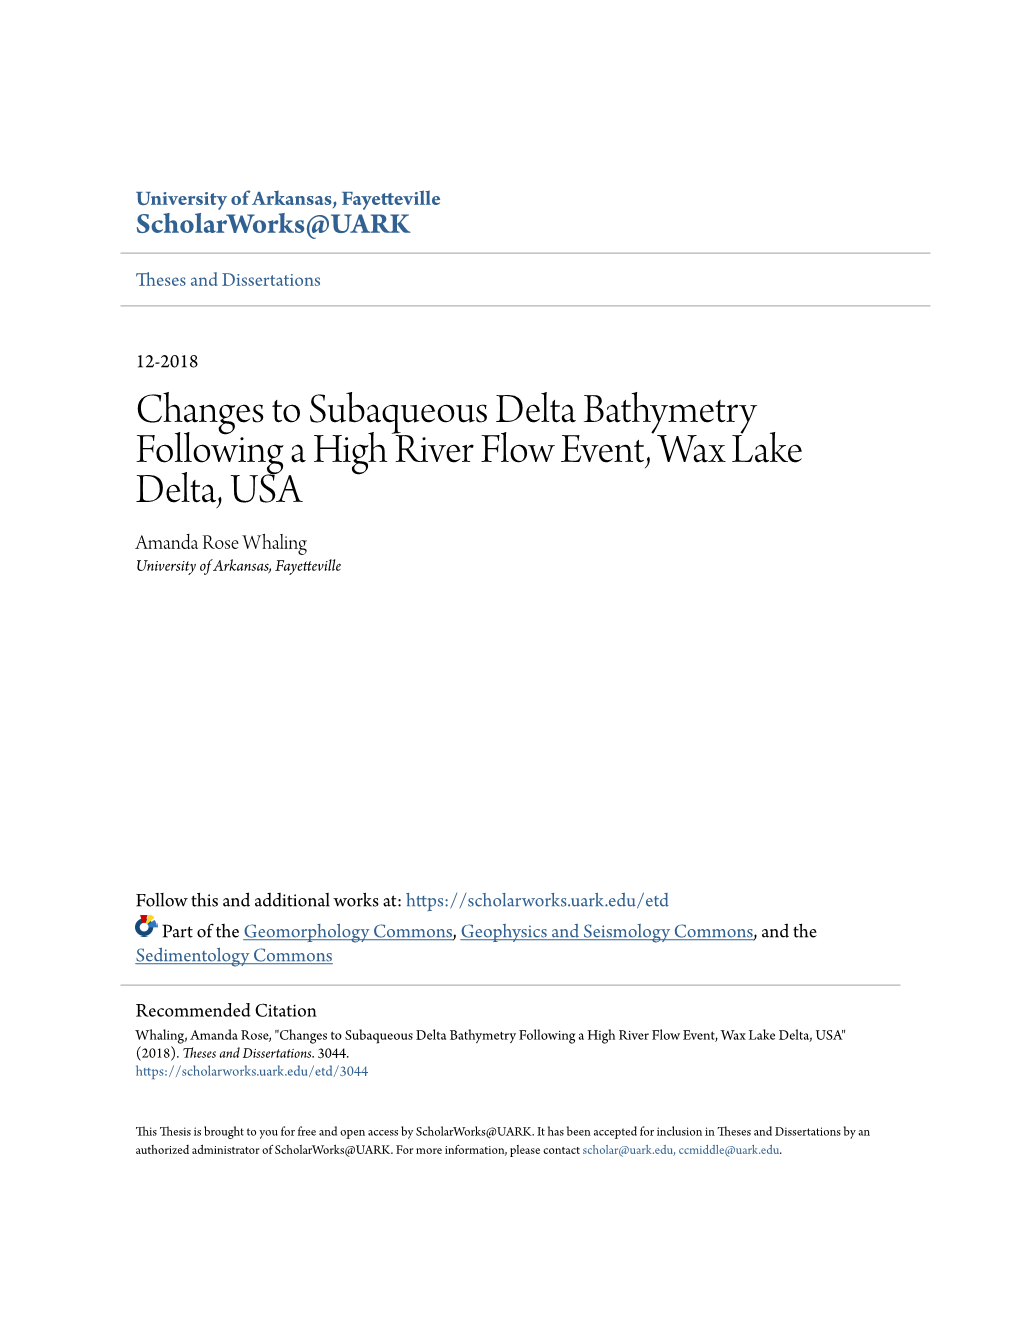 Changes to Subaqueous Delta Bathymetry Following a High River Flow Event, Wax Lake Delta, USA Amanda Rose Whaling University of Arkansas, Fayetteville